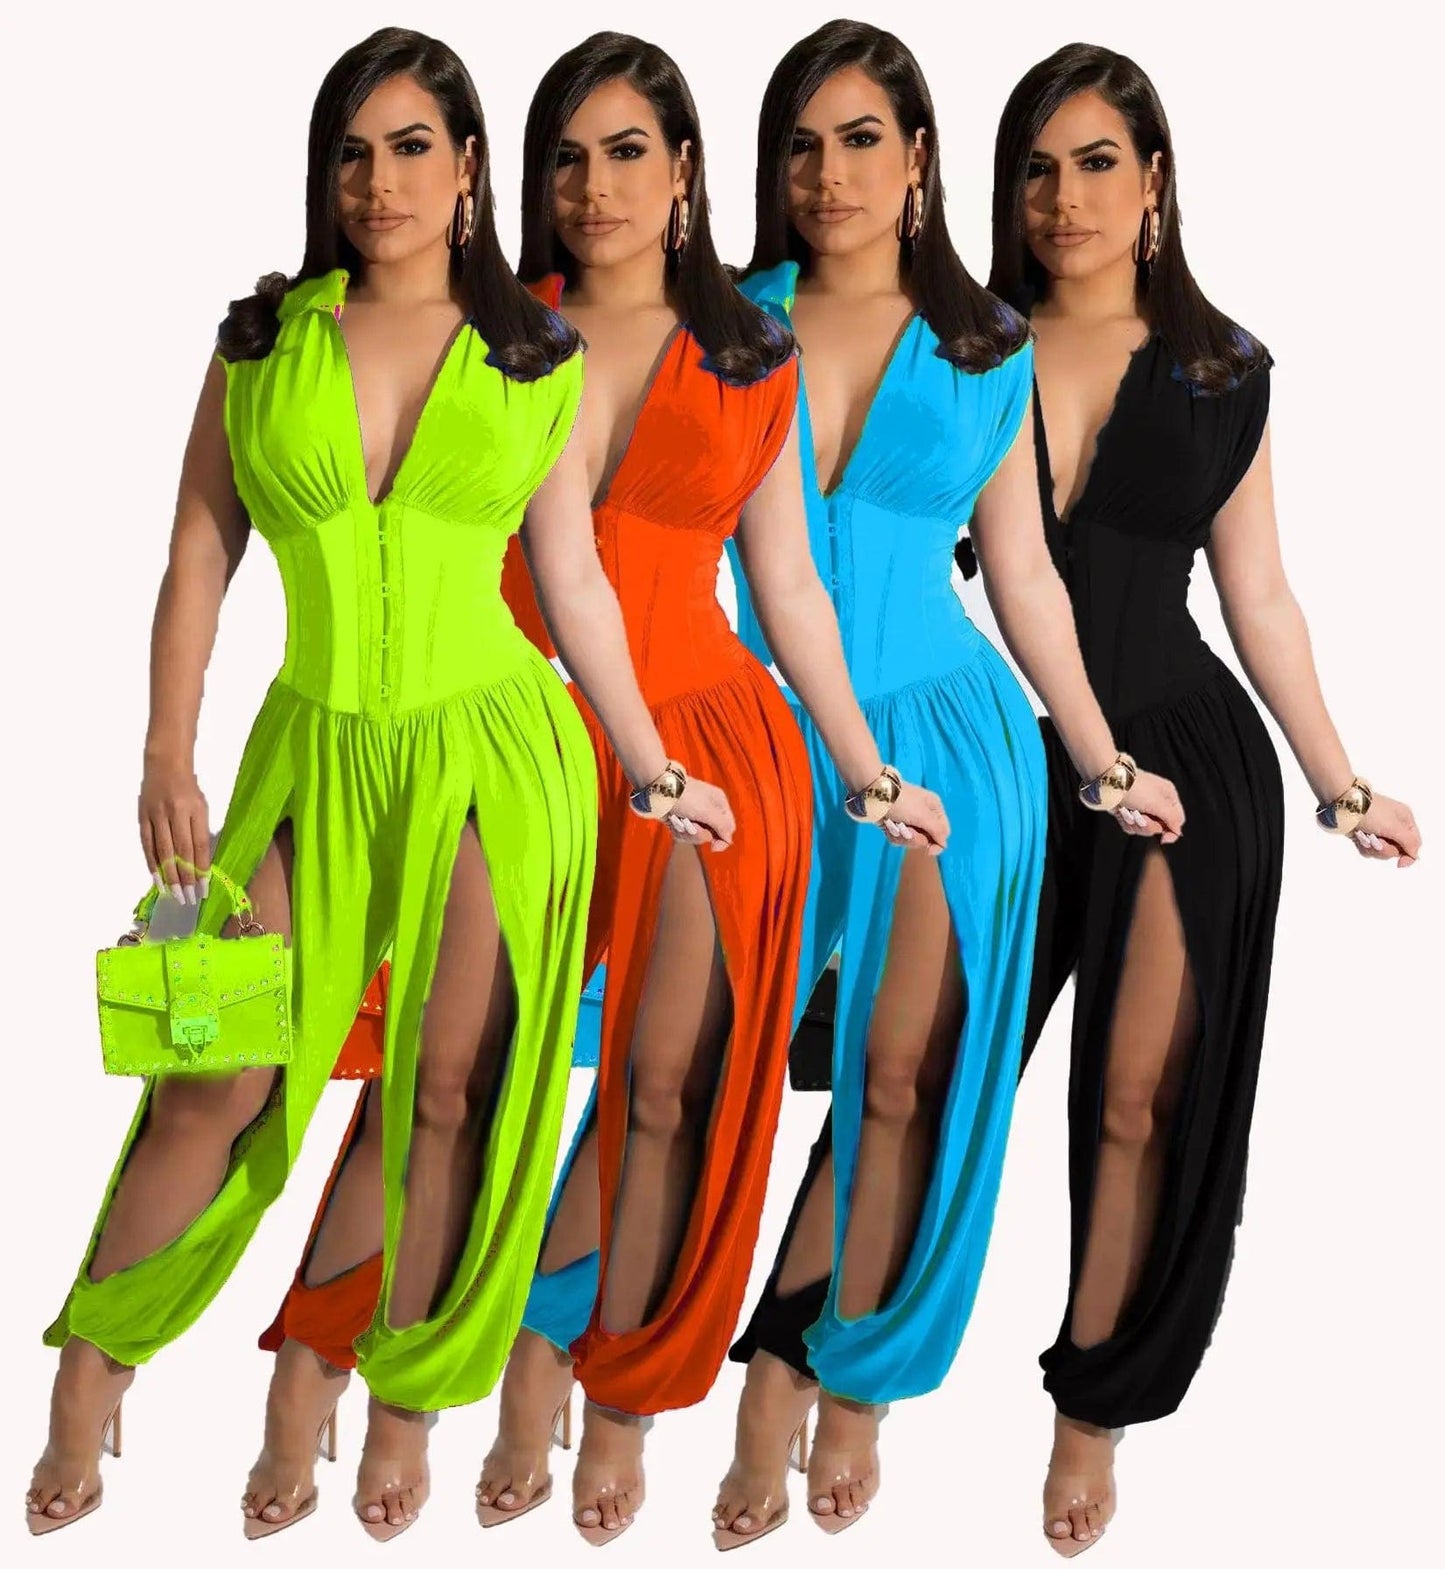 New Solid Color Sleeveless Romper Women Jumpsuits Alpha C Apparel